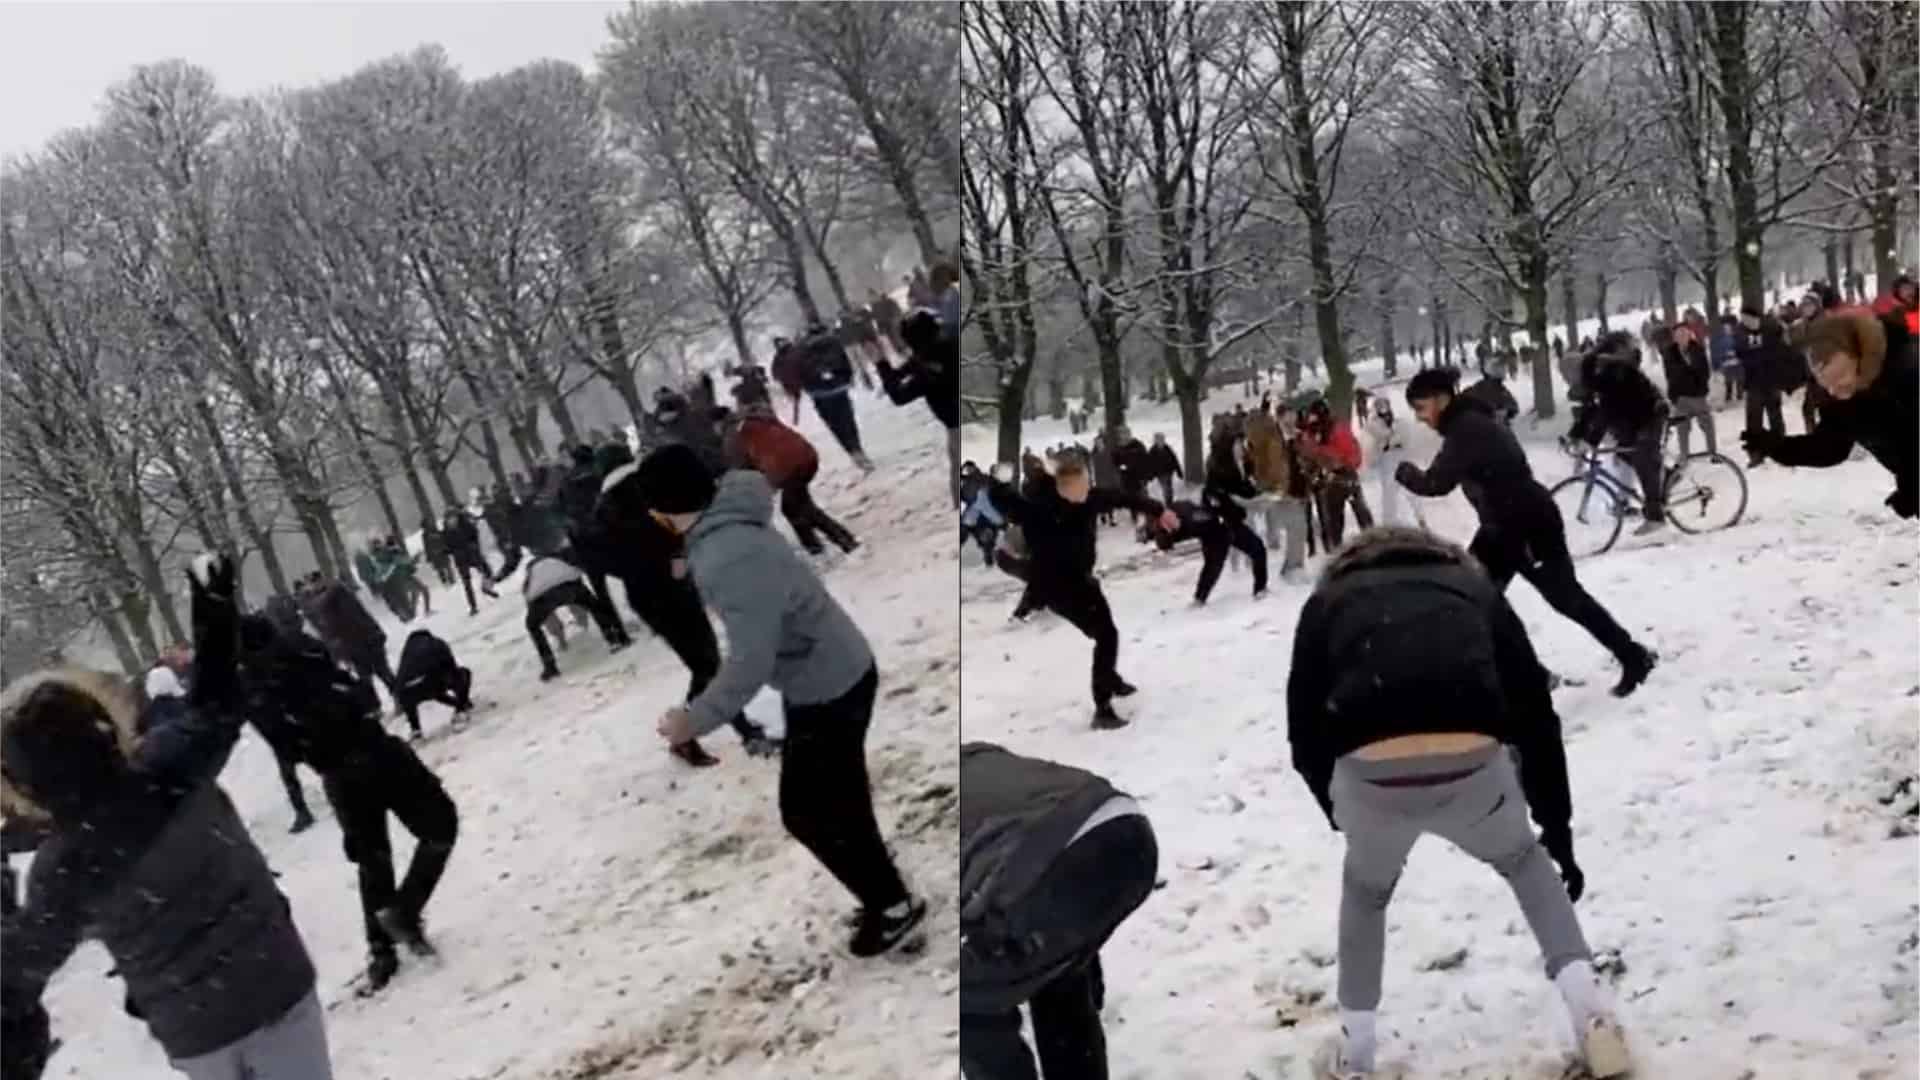 ‘It was a very welcome relief’ student defends lockdown-breaking snowball fight